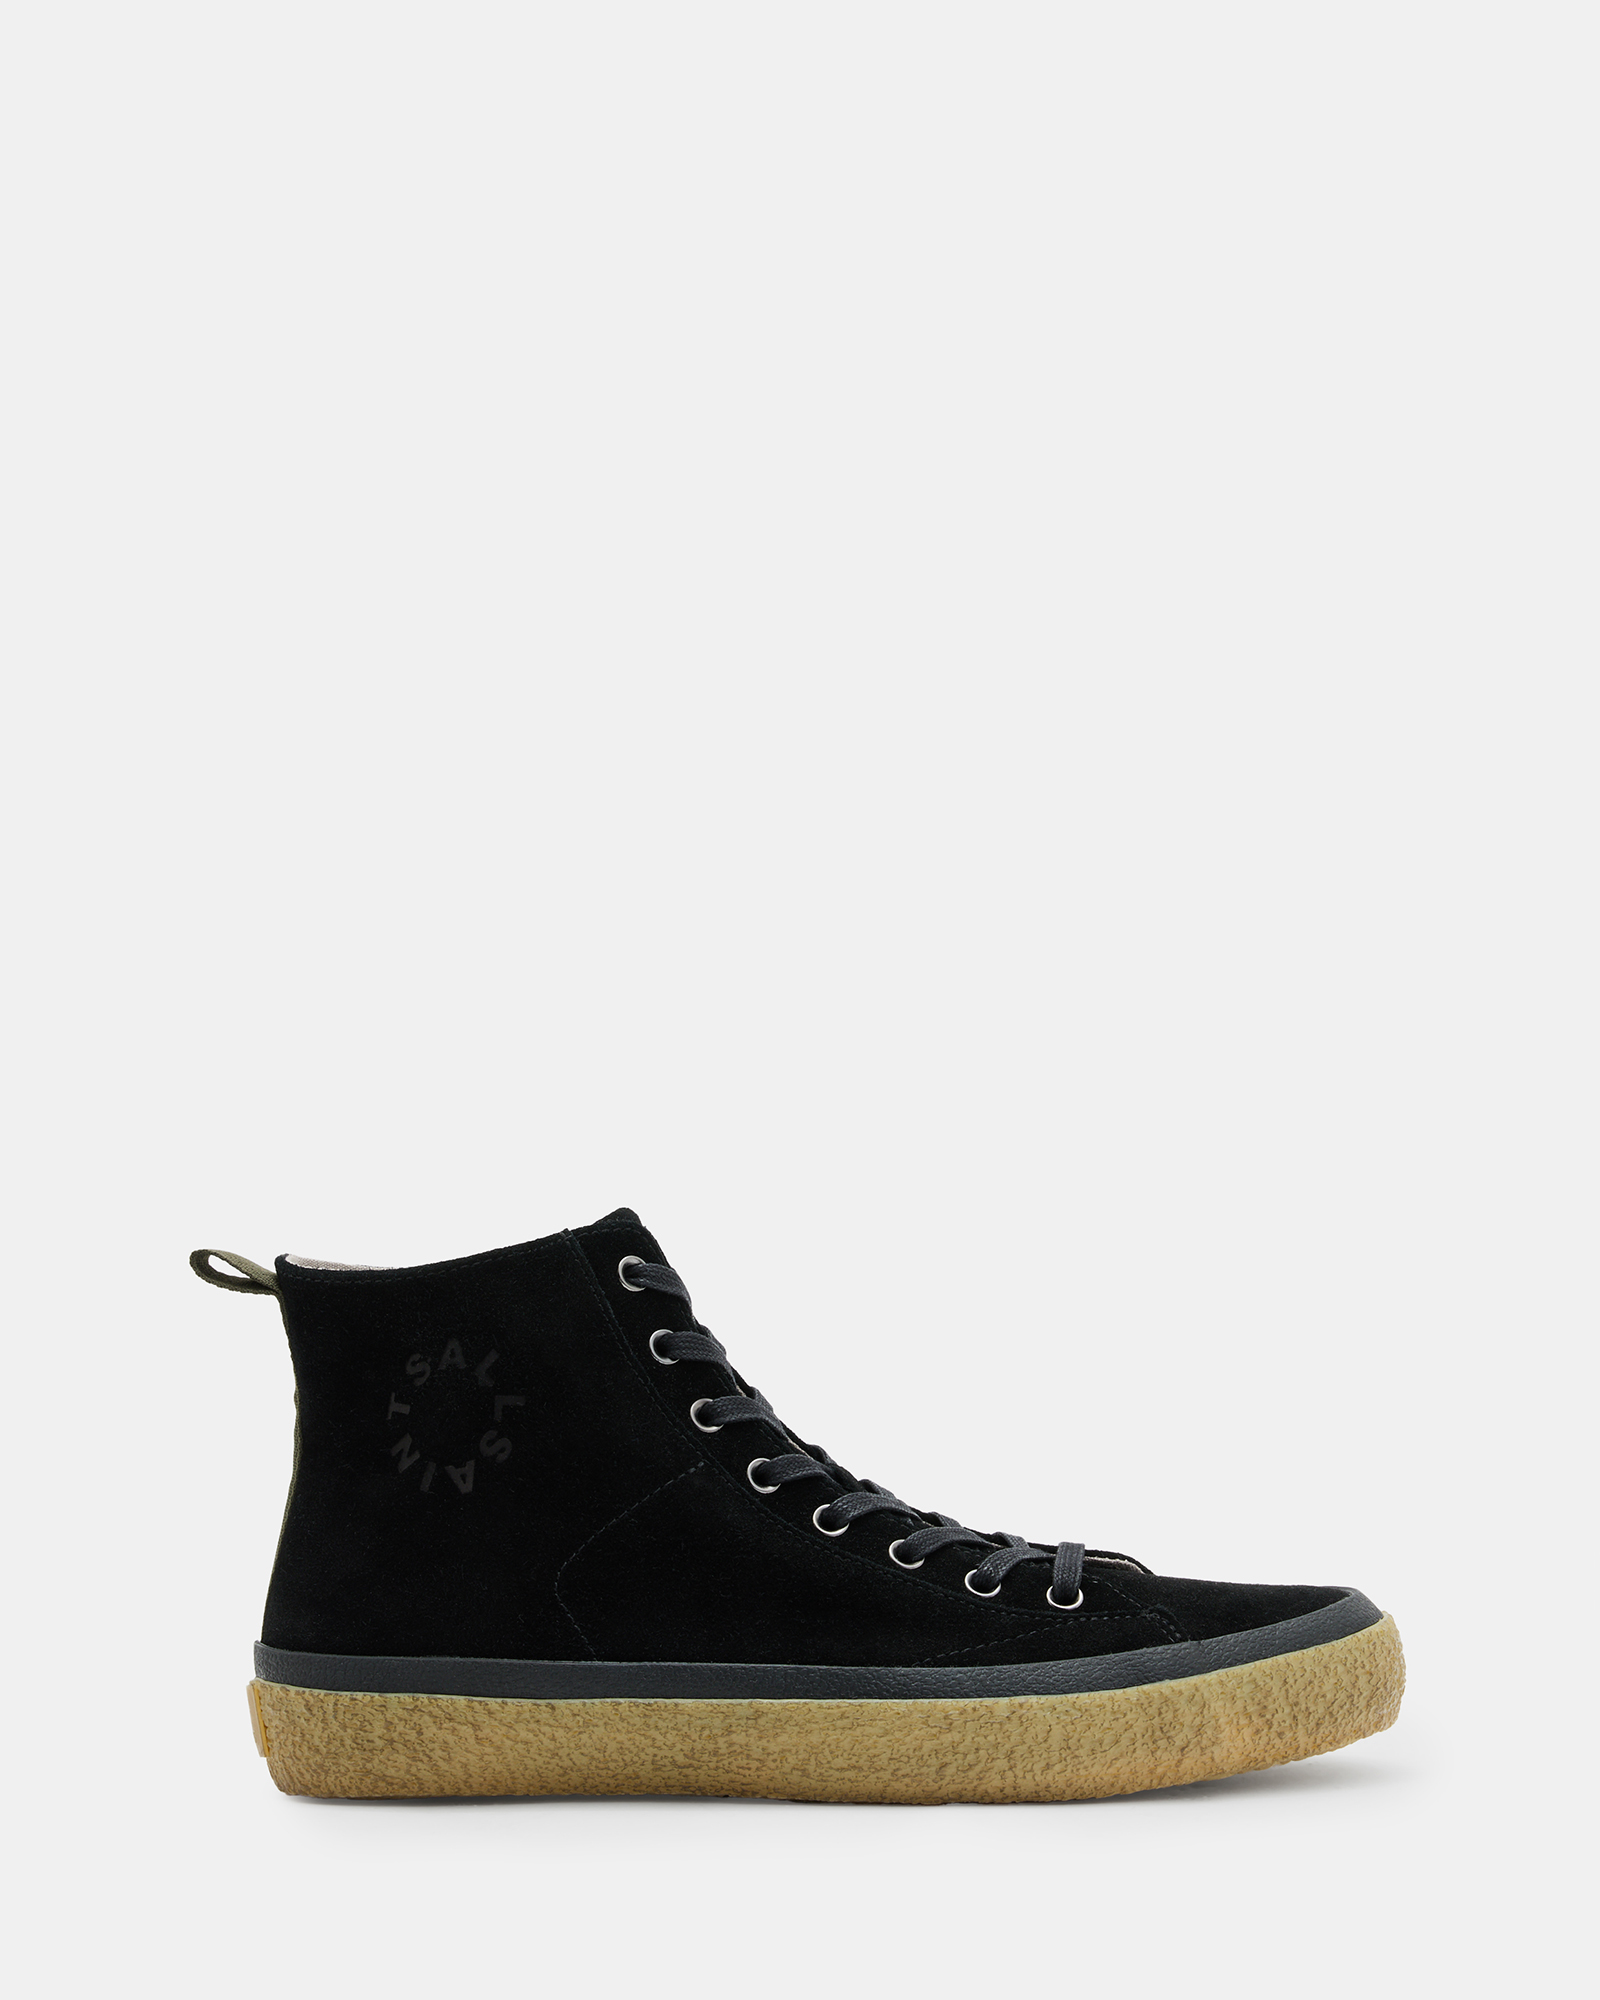 AllSaints Crister Logo Leather High Top Sneakers